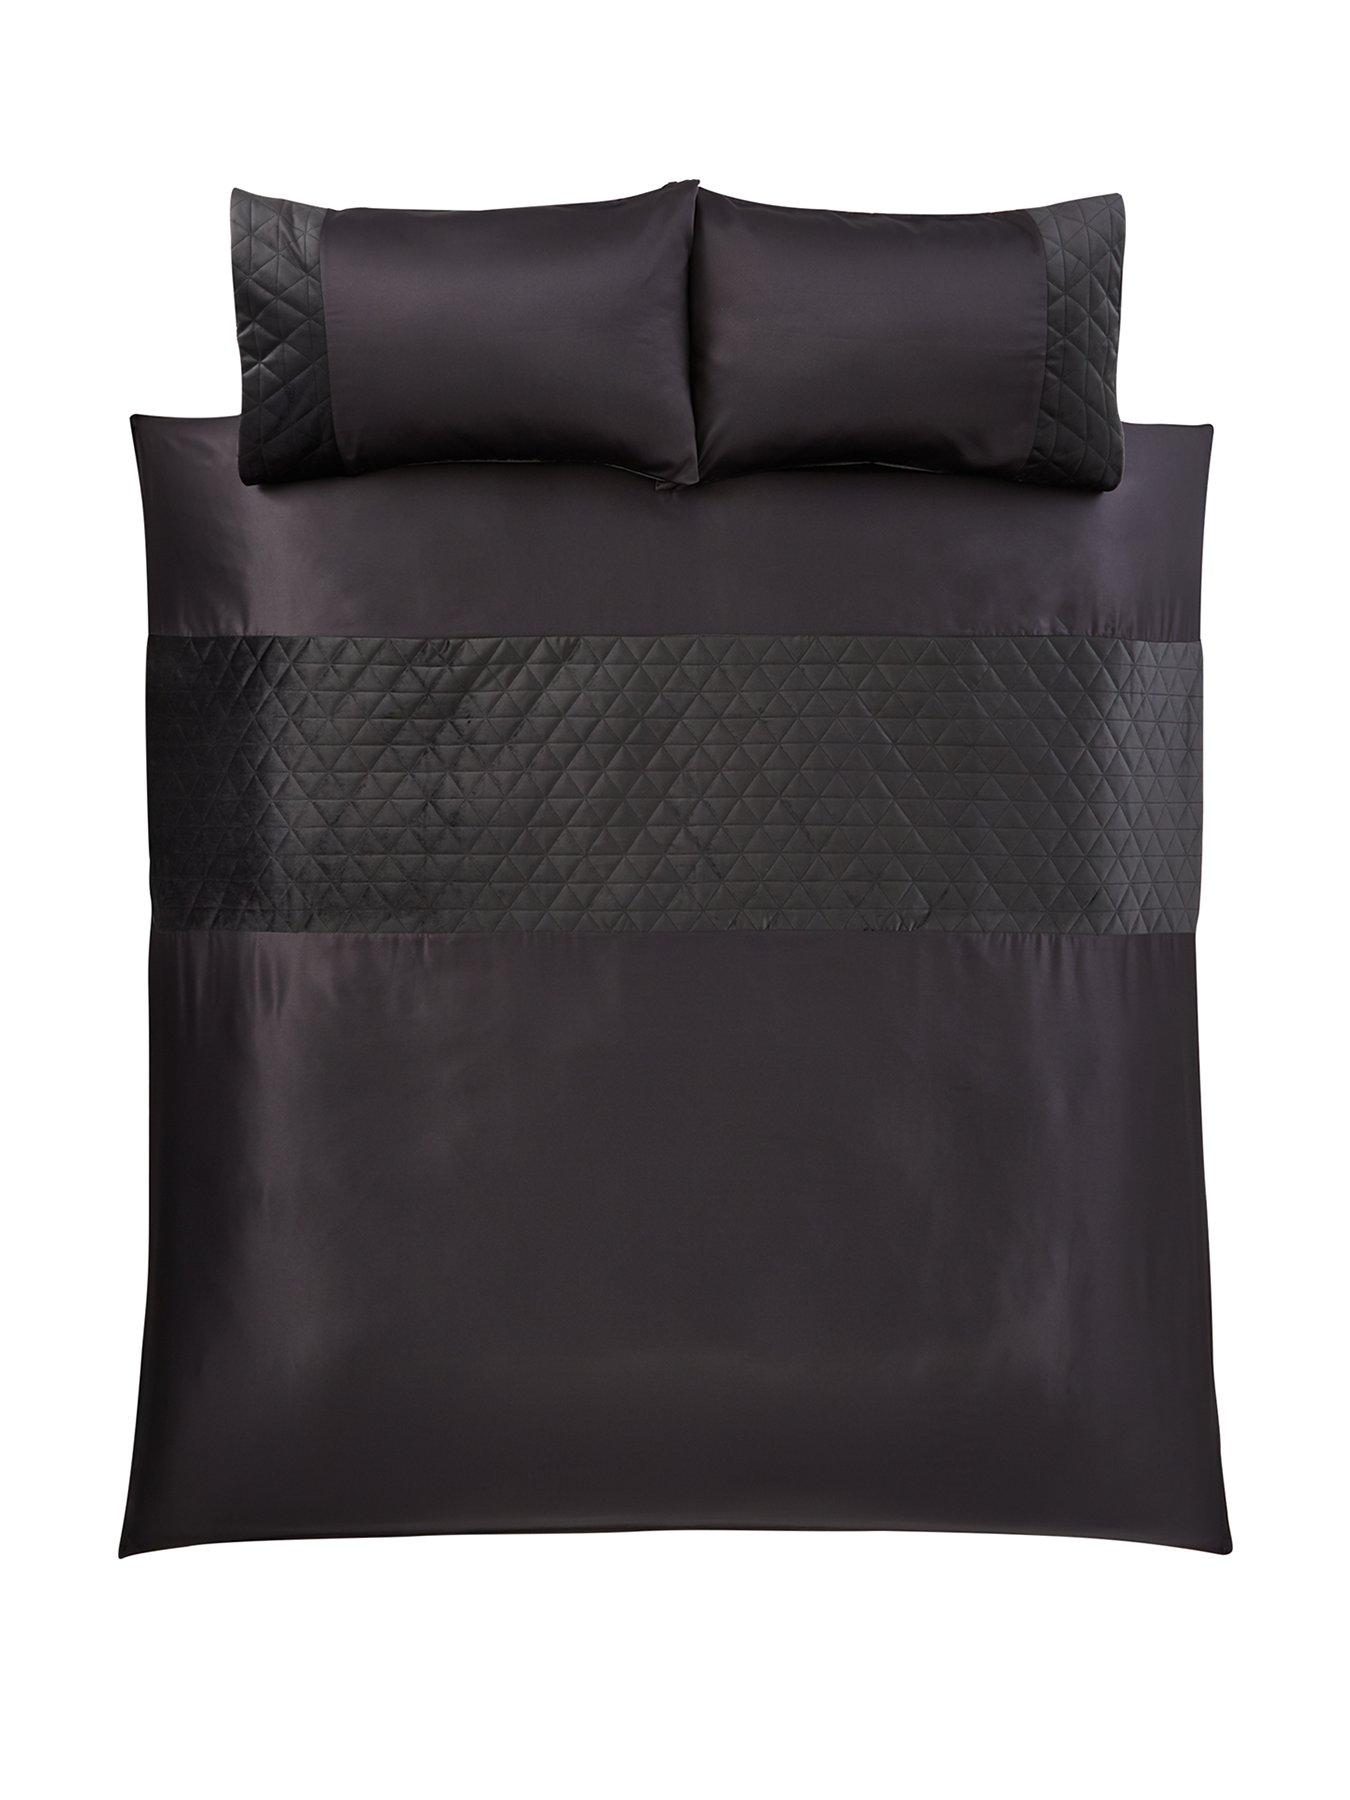 Bailey Pinsonic Duvet Cover - Charcoal | very.co.uk